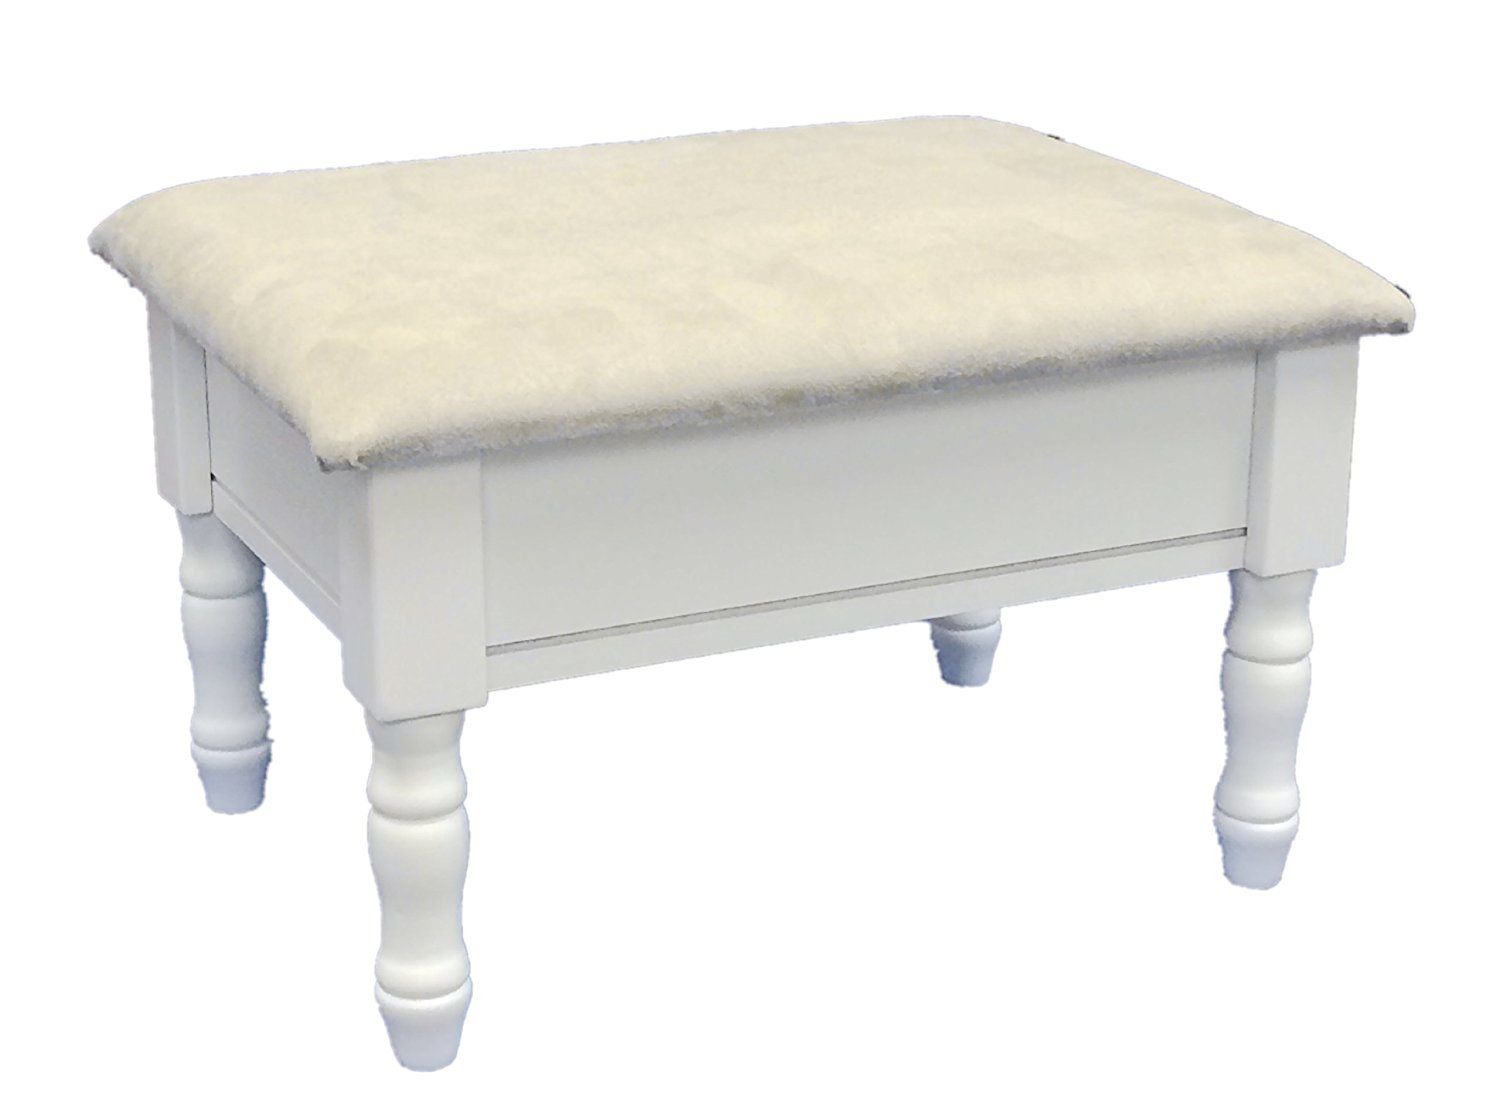 Frenchi Home Furnishing Footstool with Storage